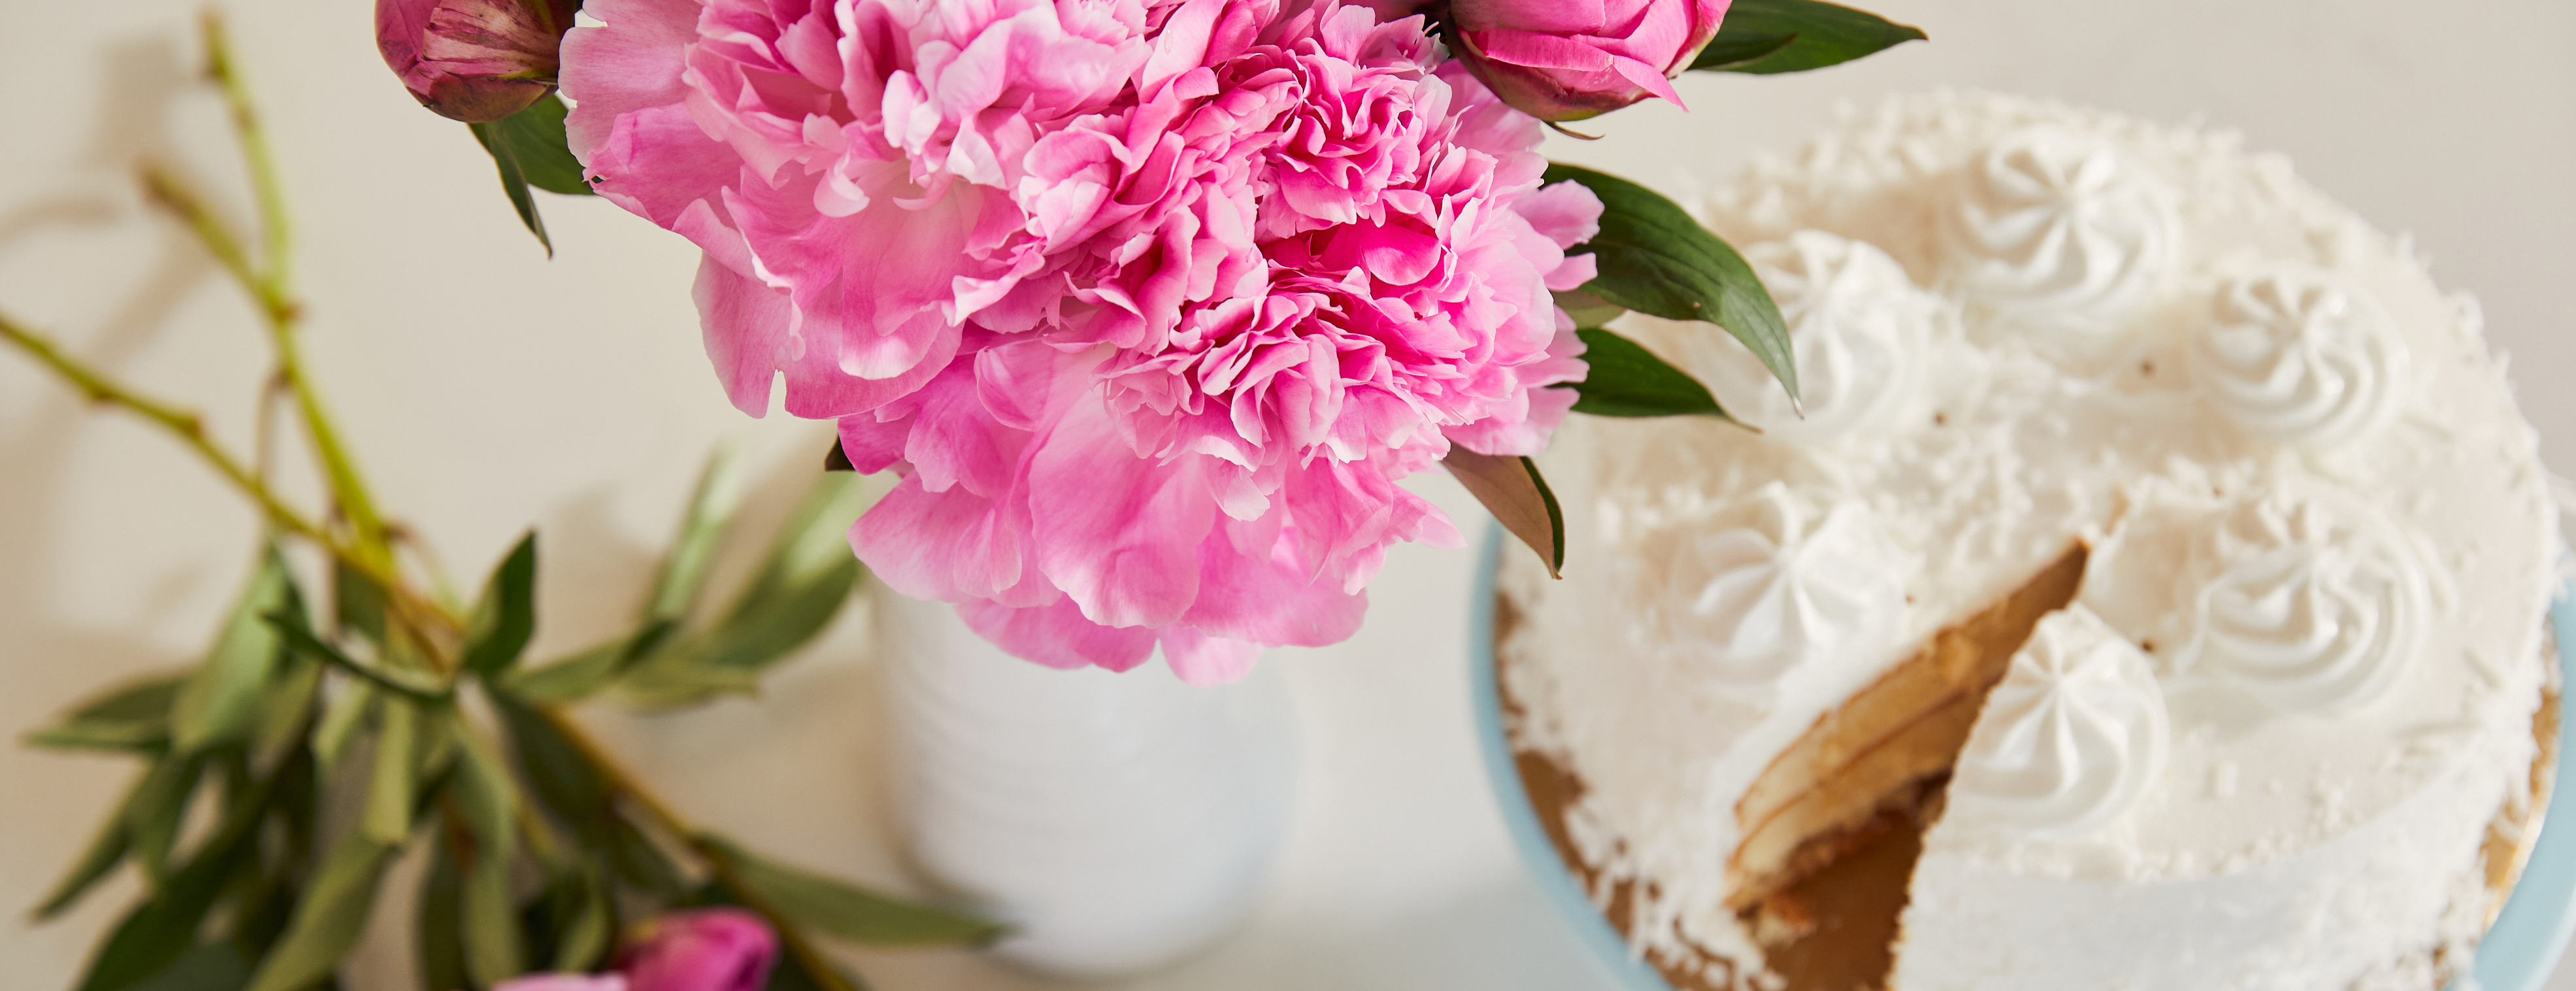 Bouquet of bright pink peonies on a table with frosted white birthday cake.